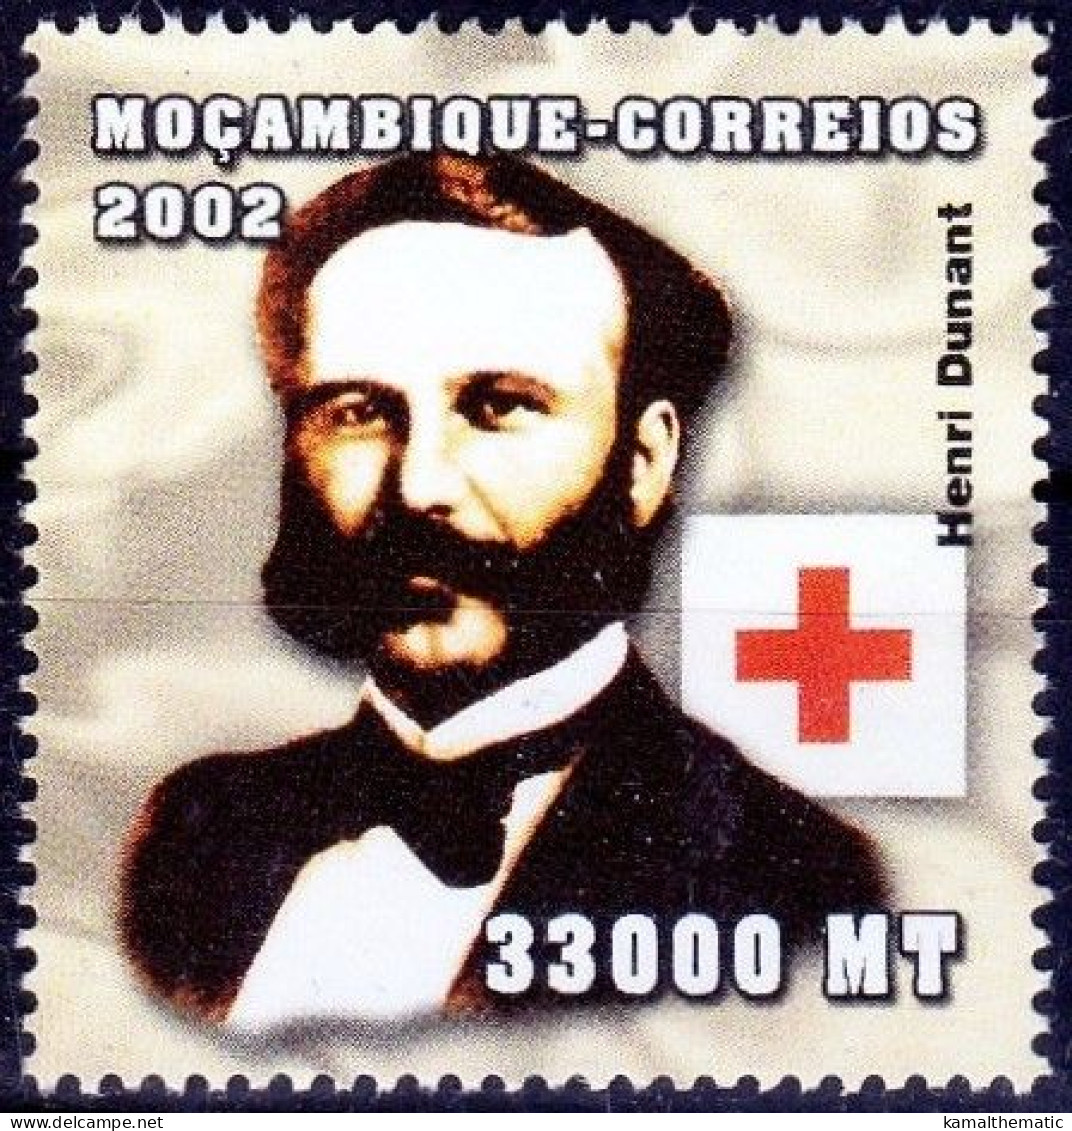 Henry Dunant, Nobel Peace, Red Cross, Mozambique 2002 MNH - Henry Dunant